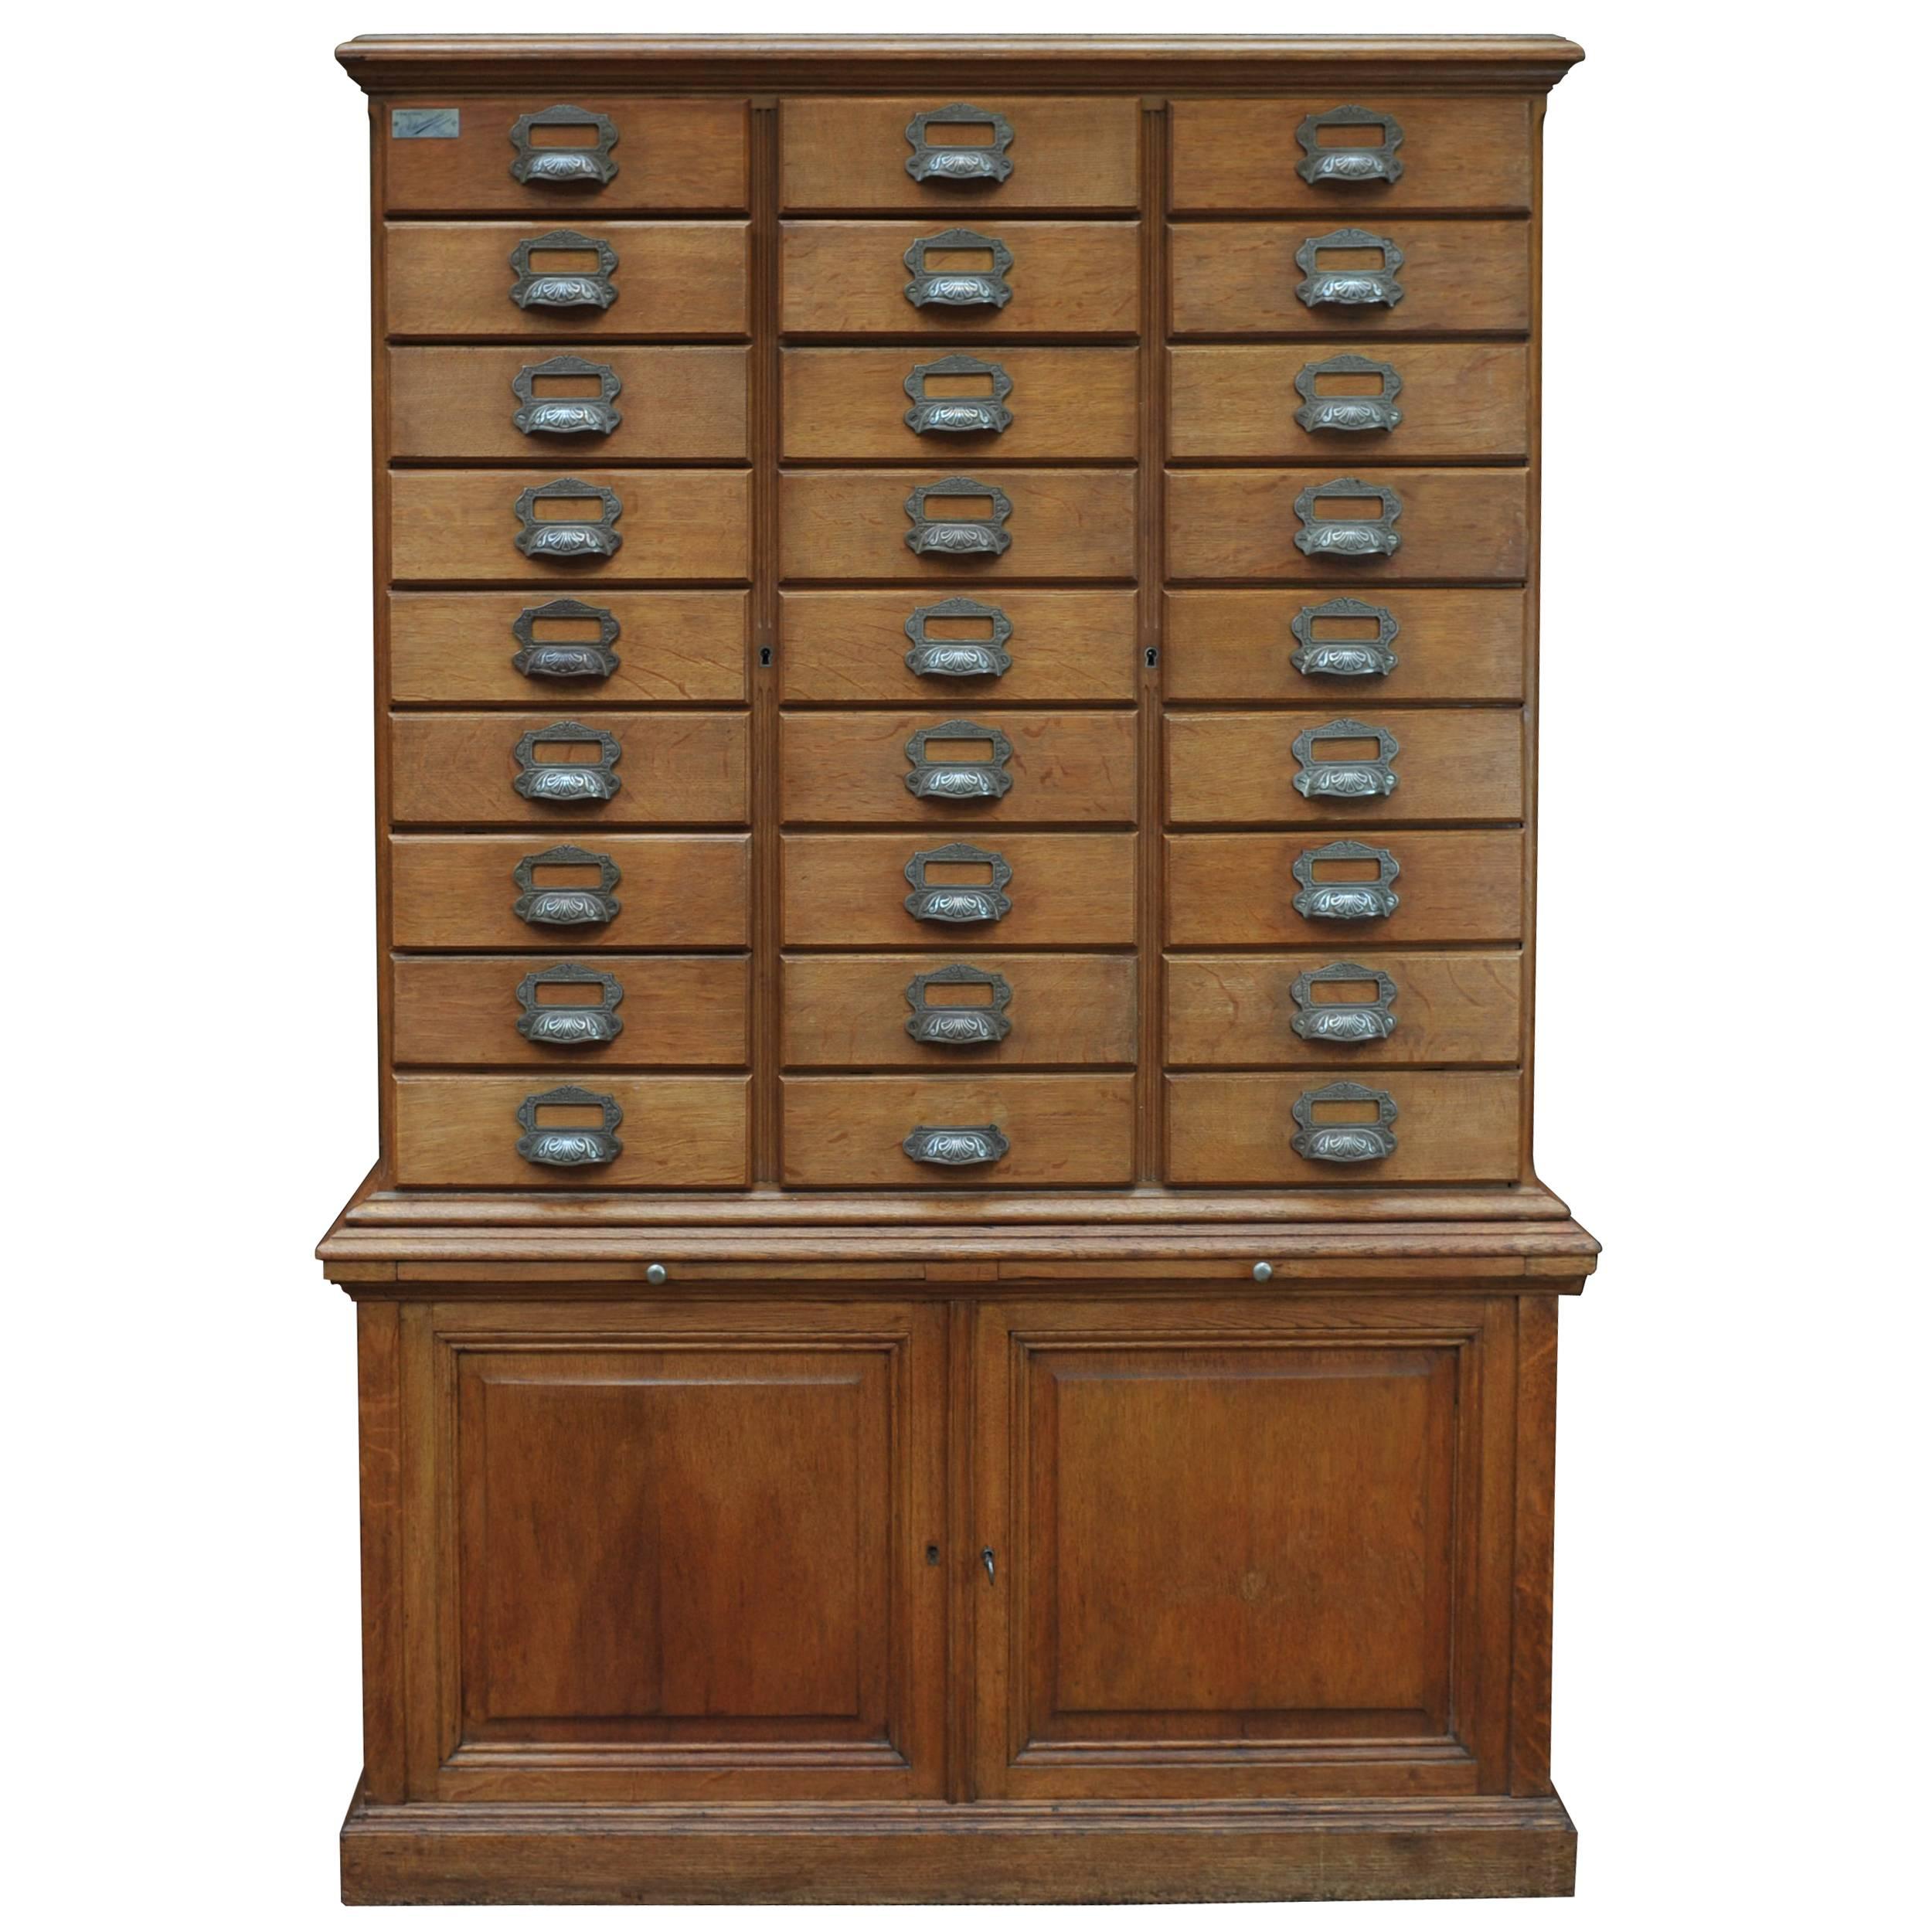 French Oak Notary Luxurious Multi-Drawer File Cabinet from E.Chouanrad, Paris